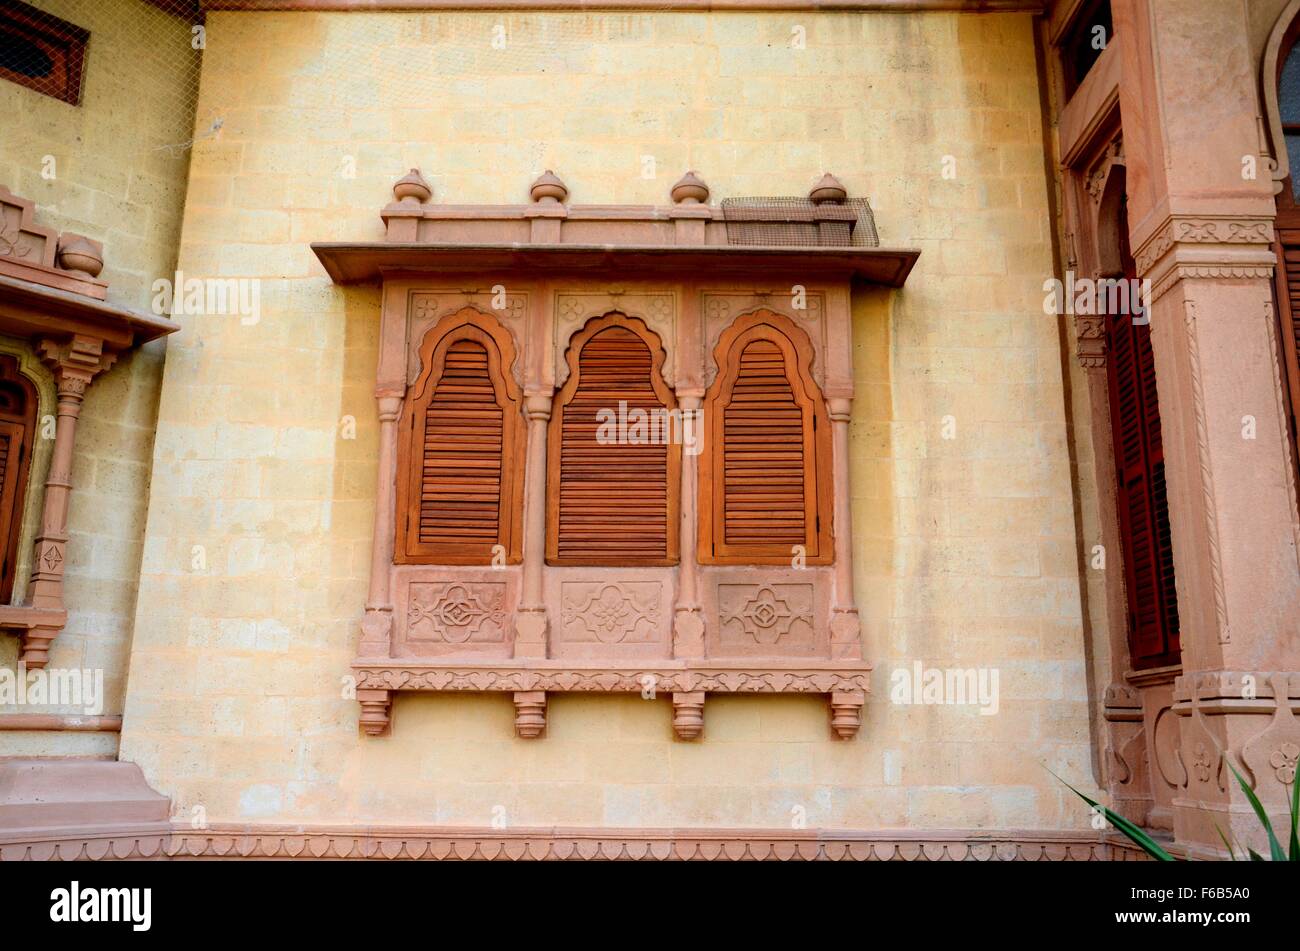 Wood carved shutters and ornate window Mohatta Palace Museum Karachi Sindh Pakistan Stock Photo